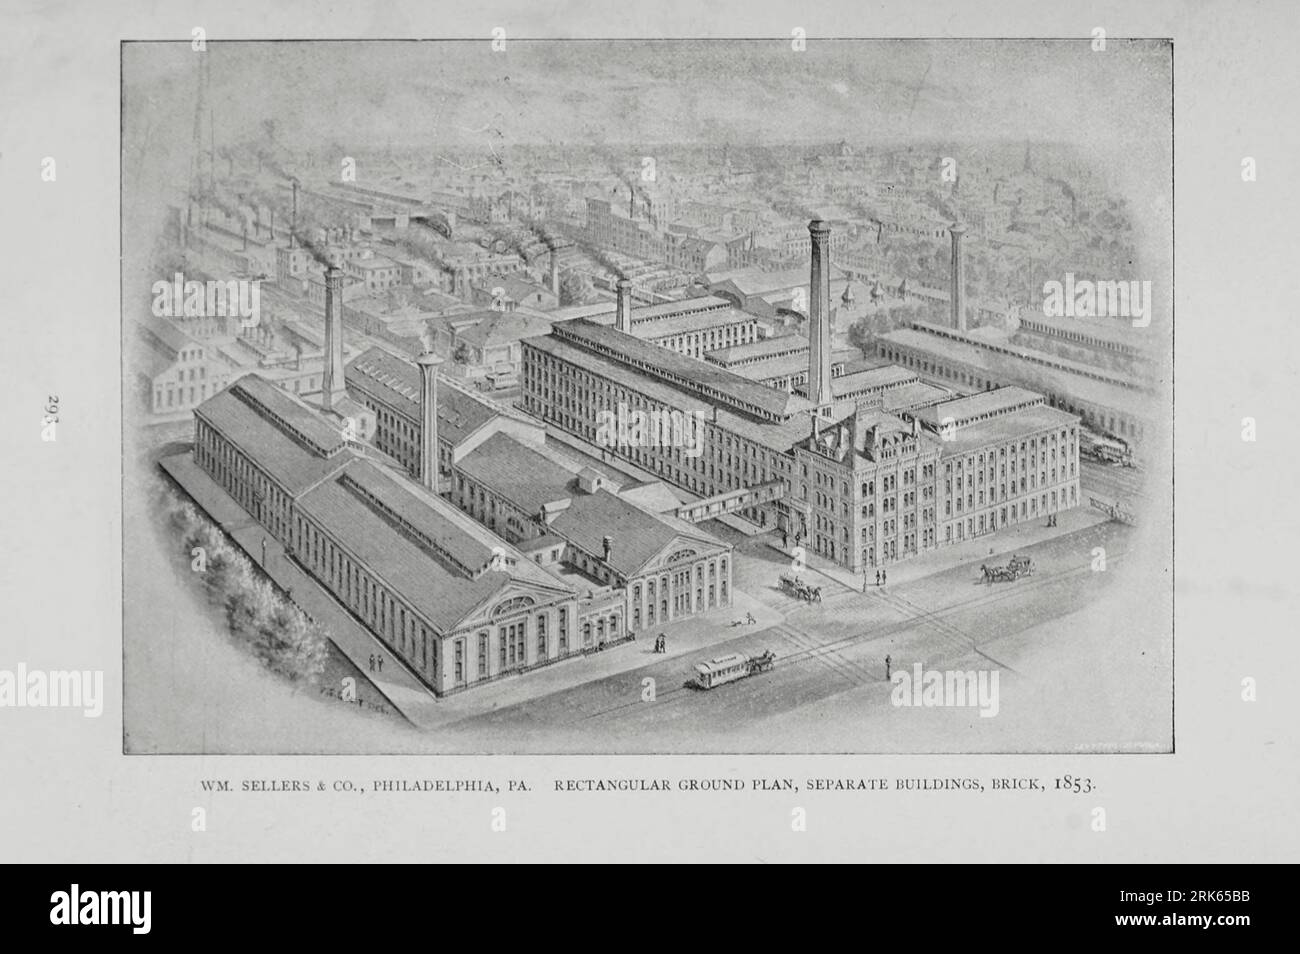 William Sellers & Co., Philadelphia, Pennsylvania Rectangular ground plan separate buildings from the Article MODERN MACHINE-SHOP ECONOMICS PRIME REQUISITES OF SHOP CONSTRUCTION By Horace L. Arnold from The Engineering Magazine DEVOTED TO INDUSTRIAL PROGRESS Volume XI October 1896 NEW YORK The Engineering Magazine Co Stock Photo